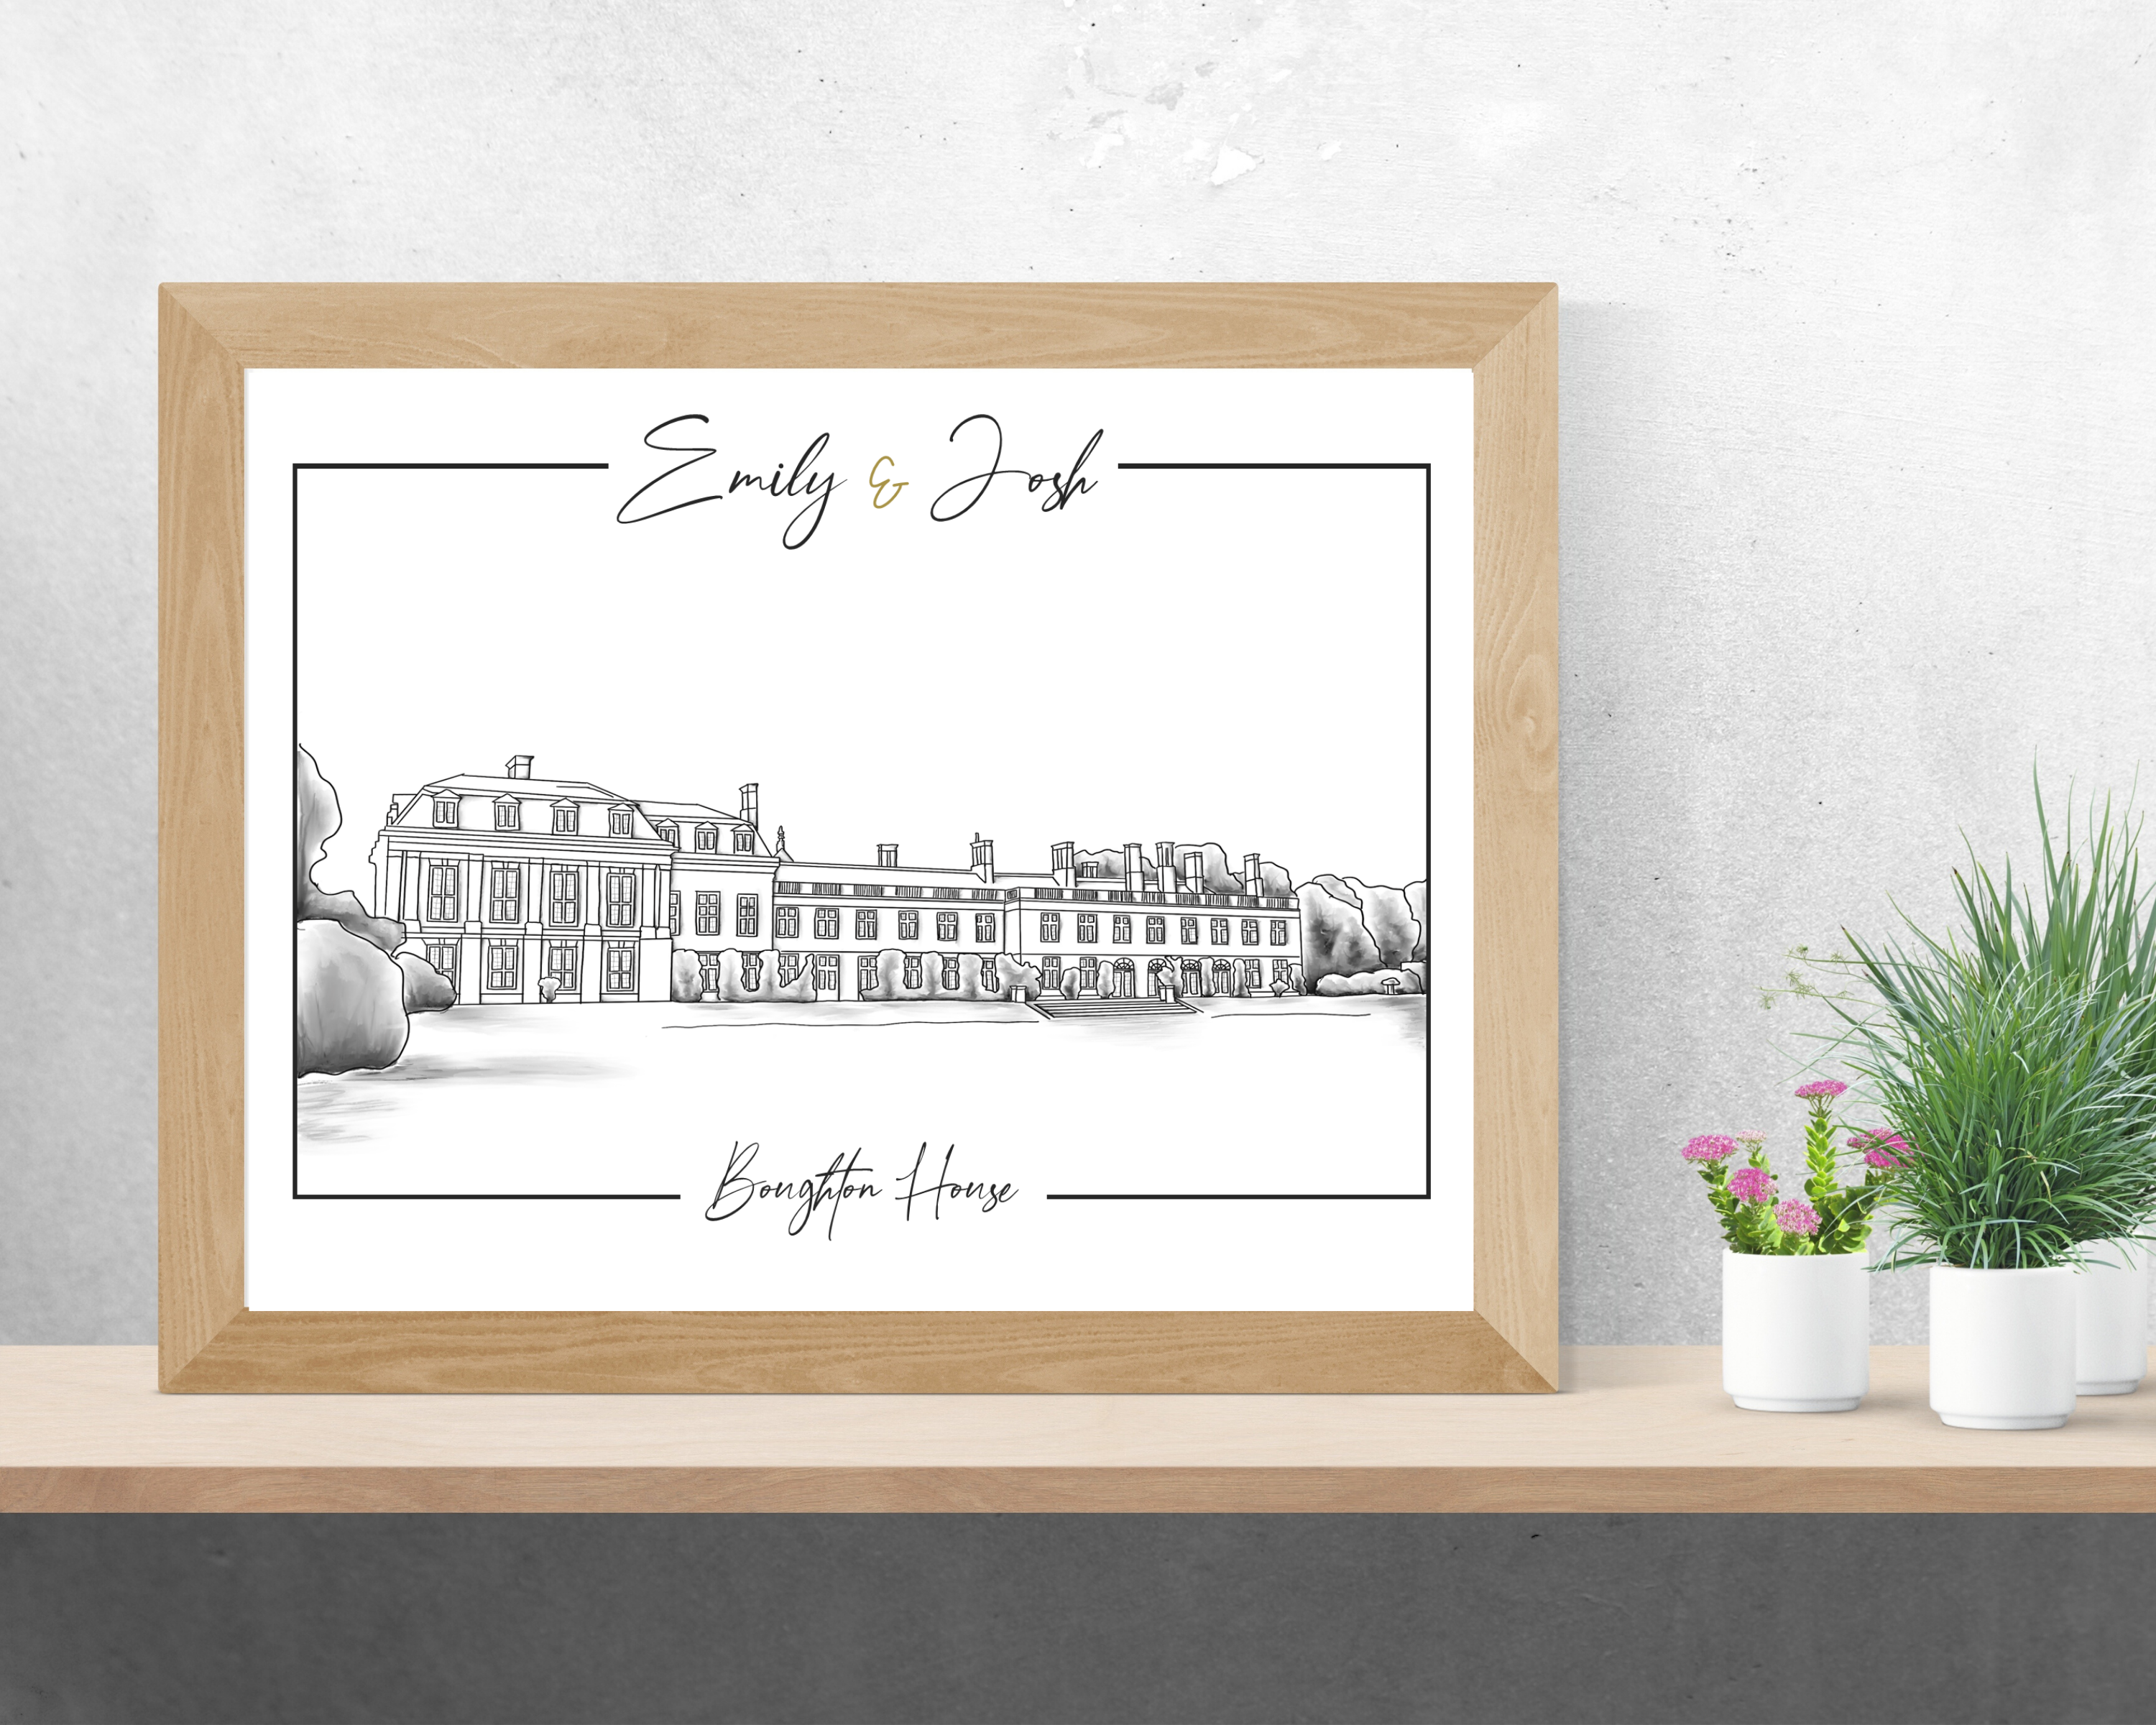 A digitally drawn wedding venue illustration of Boughton House, with the couple's names at the top, in a wooden frame.